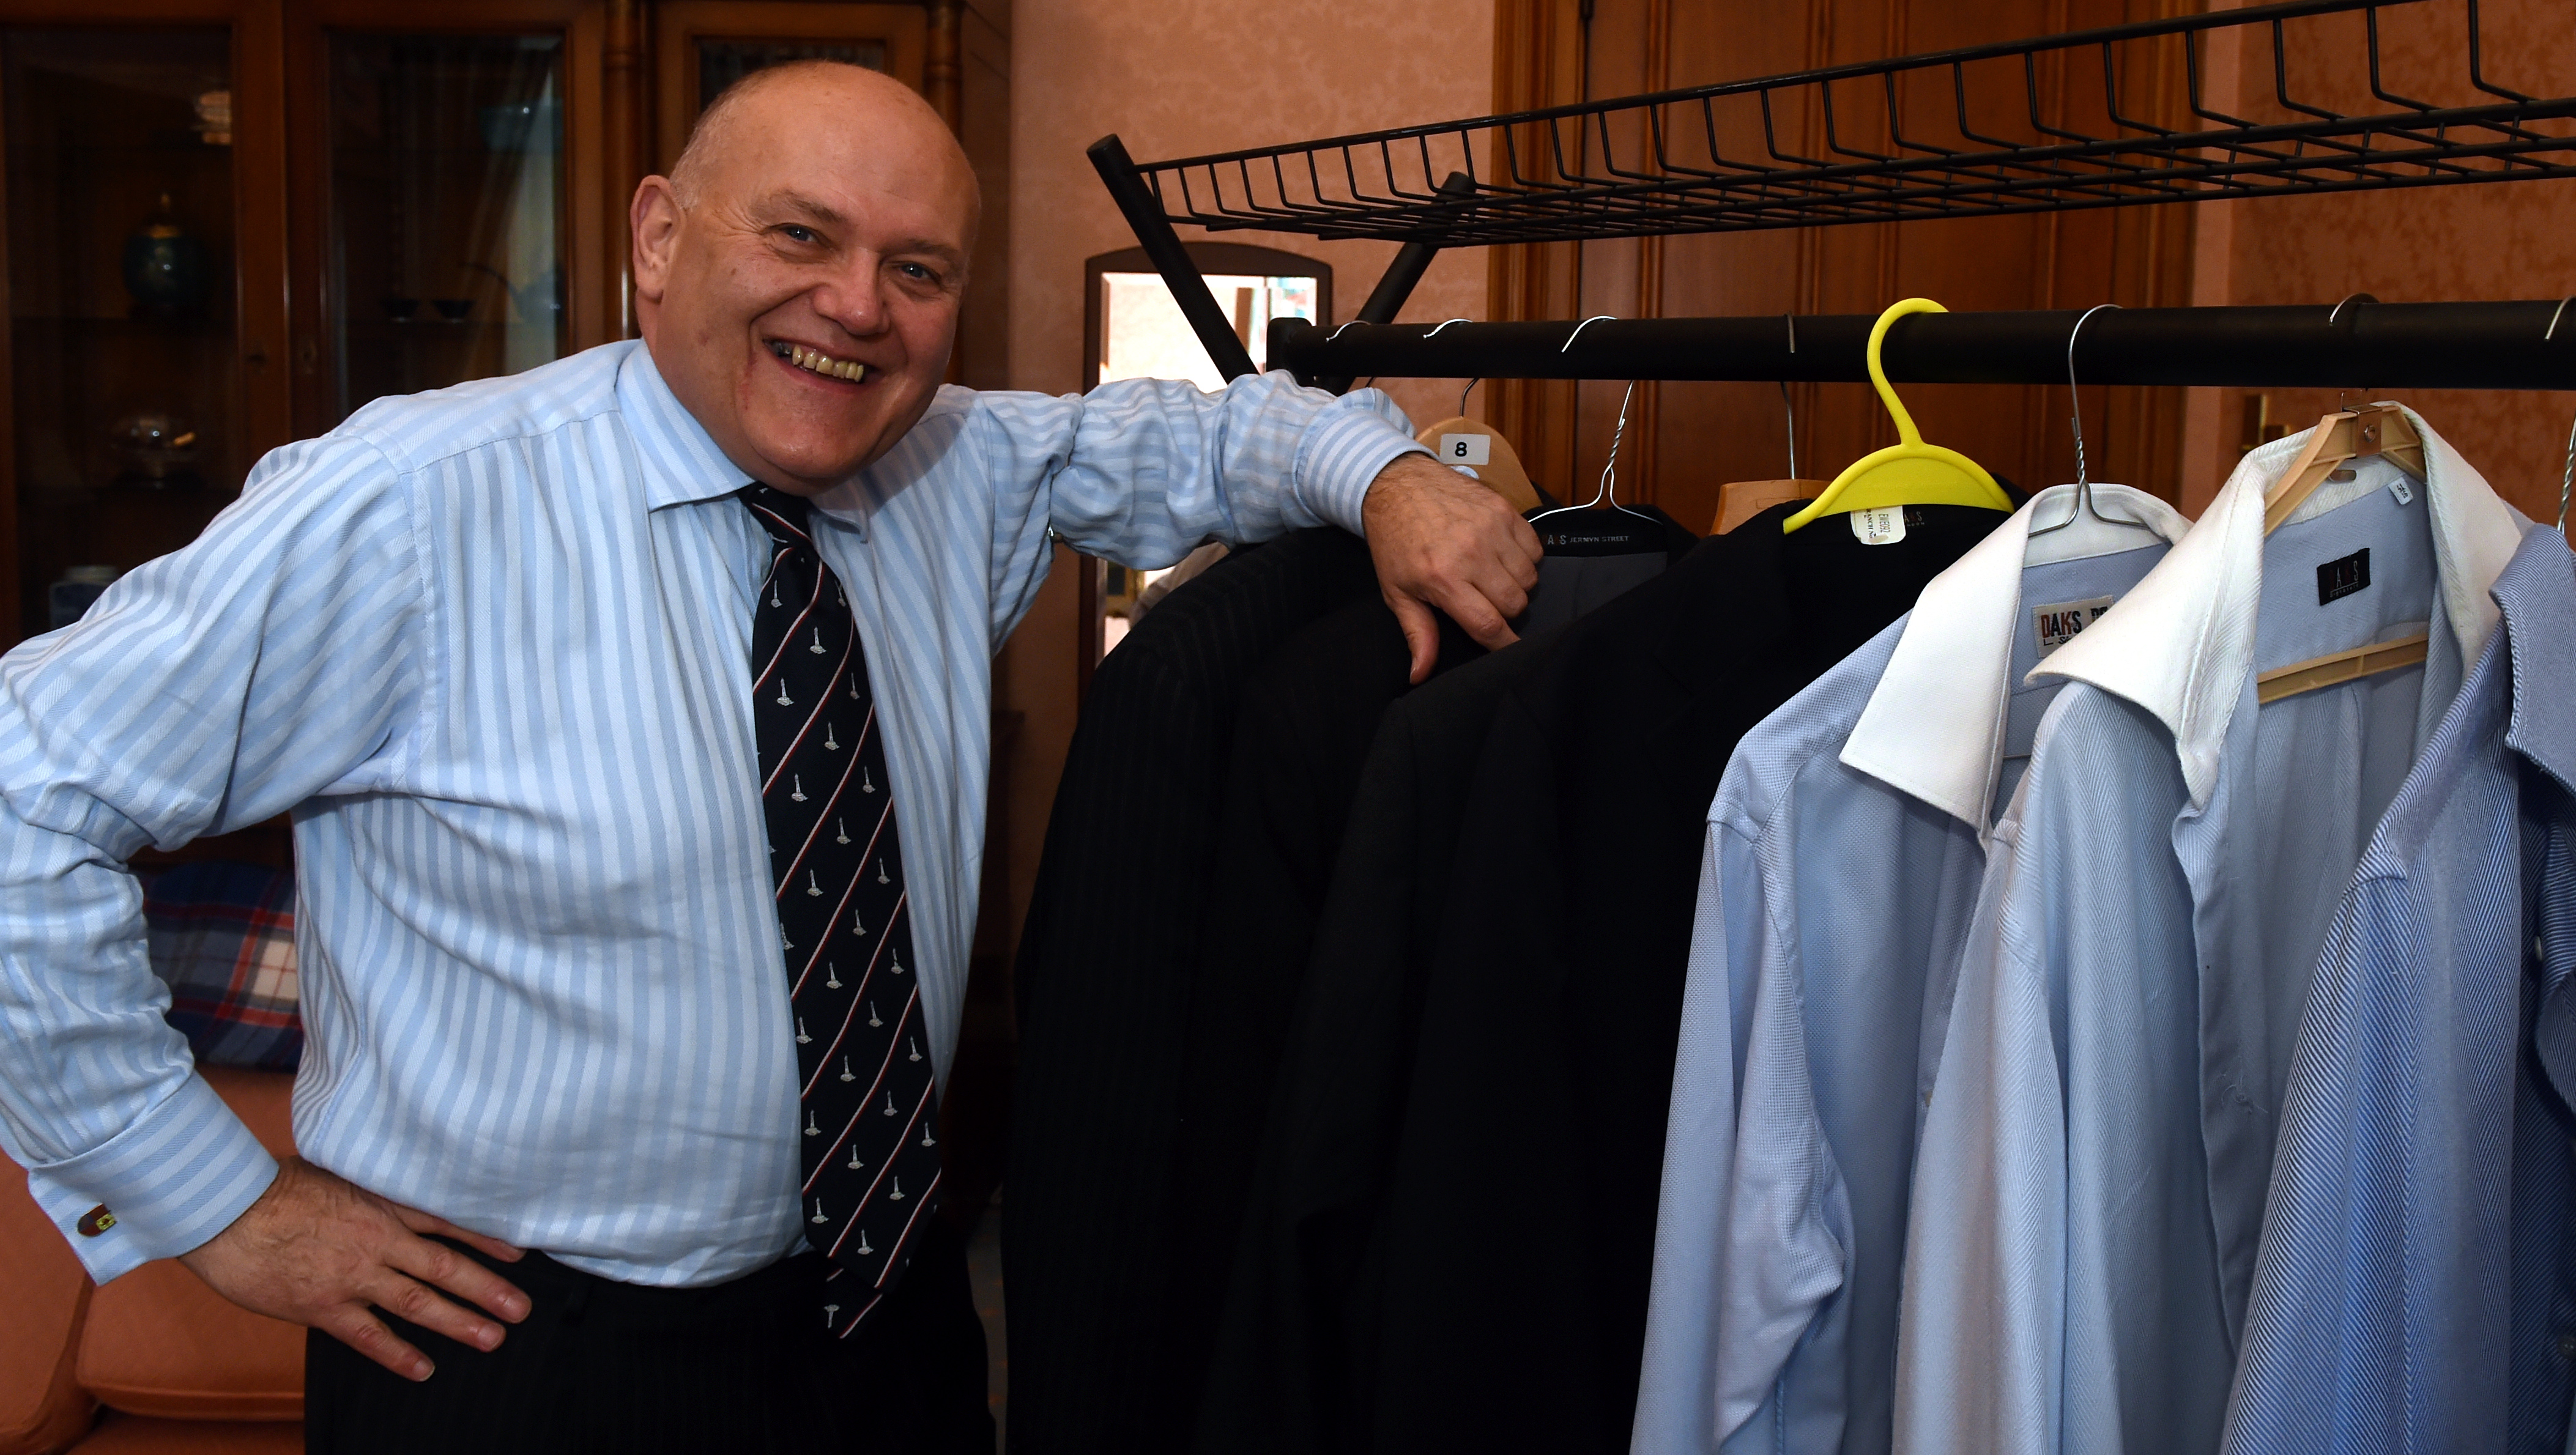 Lord Provost Barney Crockett shows his suits which he buys himself from Ebay and charity shops pictured at Town House, Aberdeen.